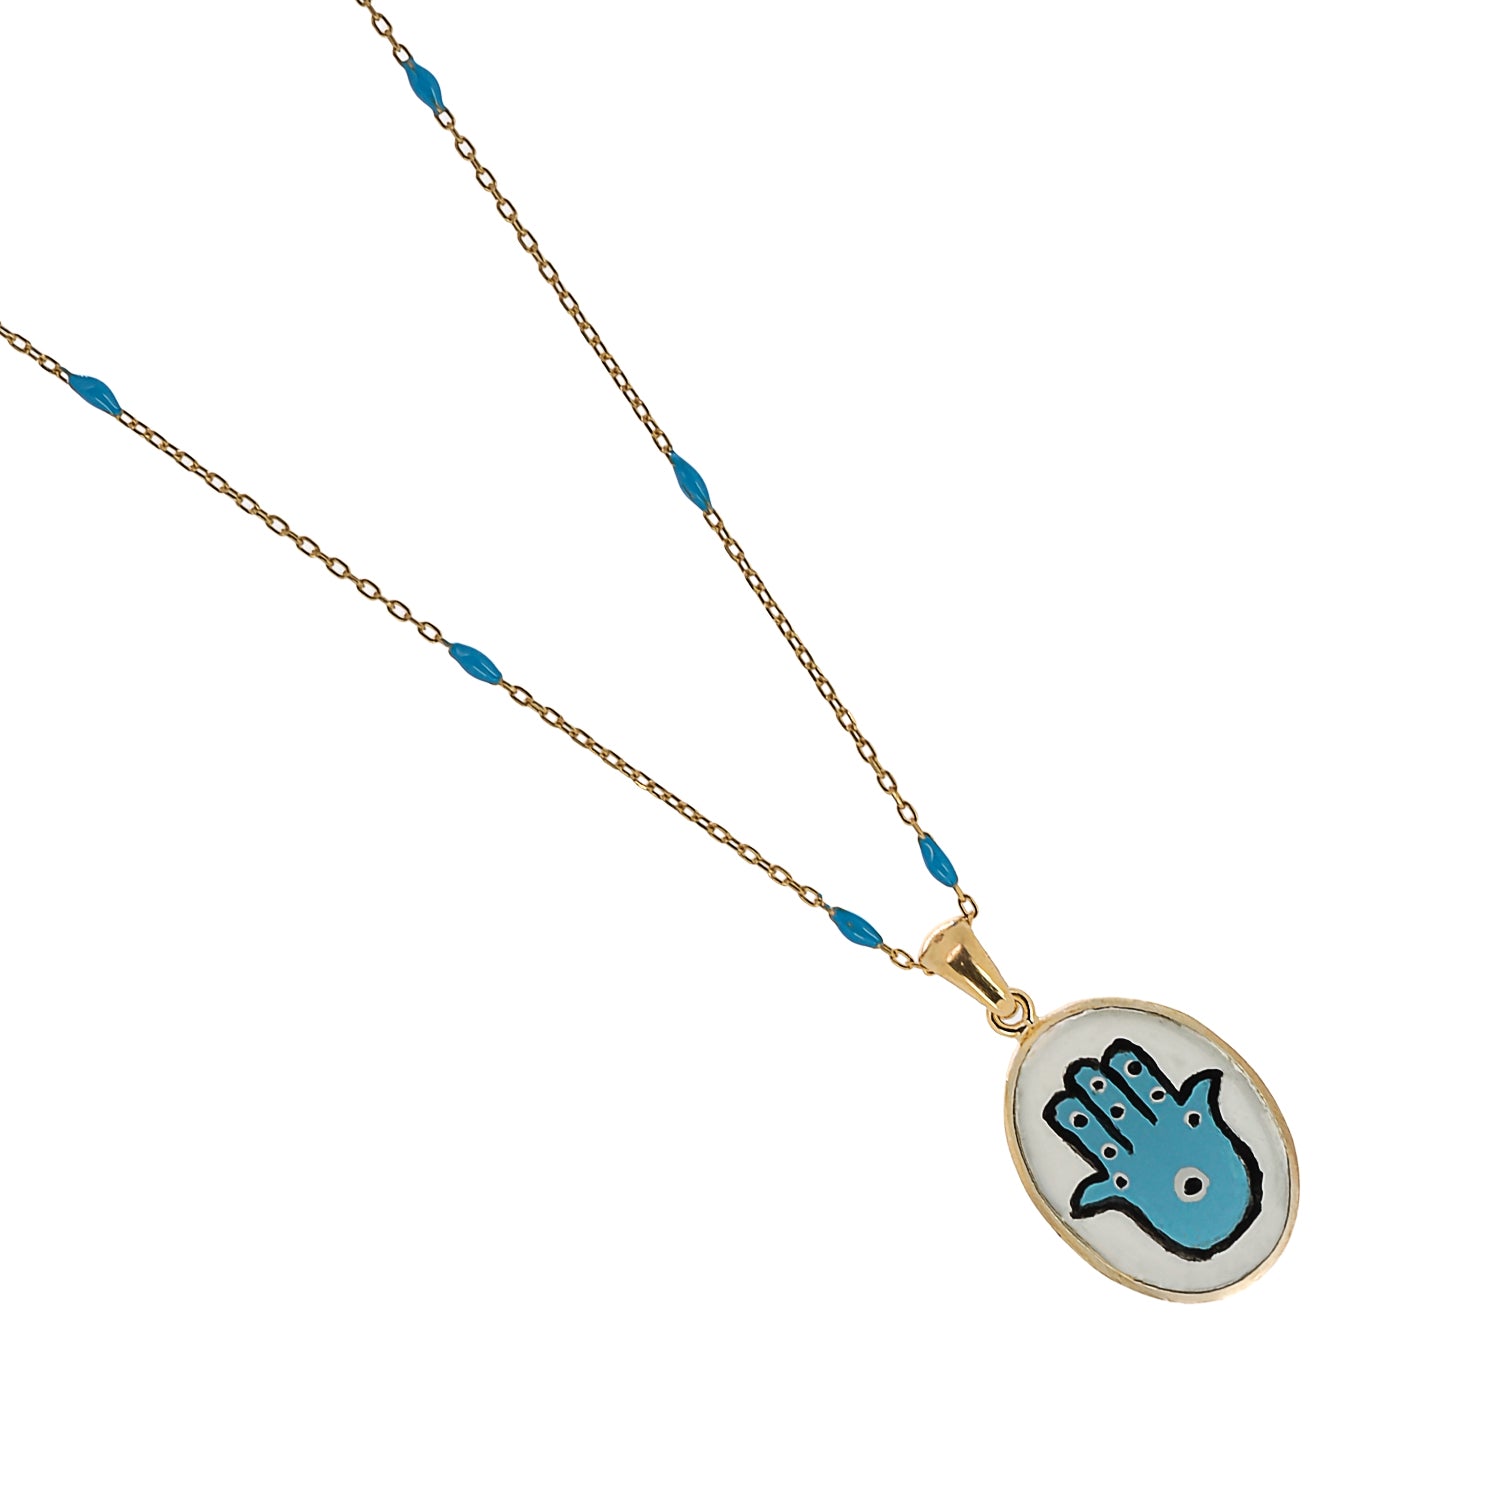 Sterling Silver Hamsa Pendant with Graceful Curves and Turquoise Enamel Detailing.